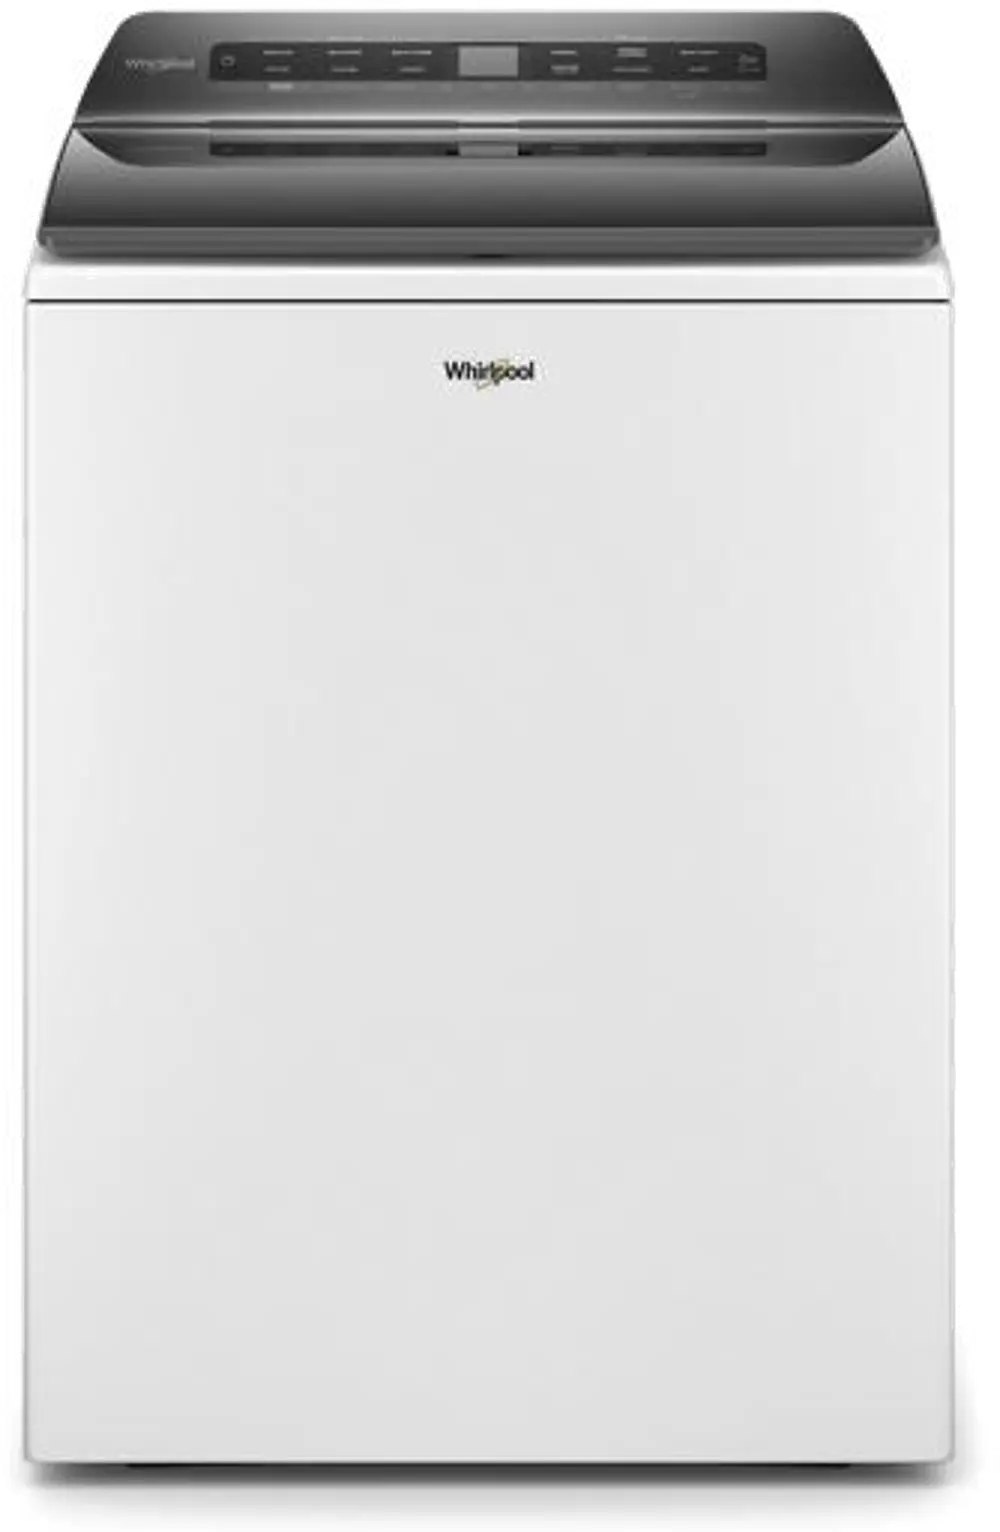 WTW6120HW Whirlpool Smart Capable Top Load Washer - 4.8 cu. ft. White-1